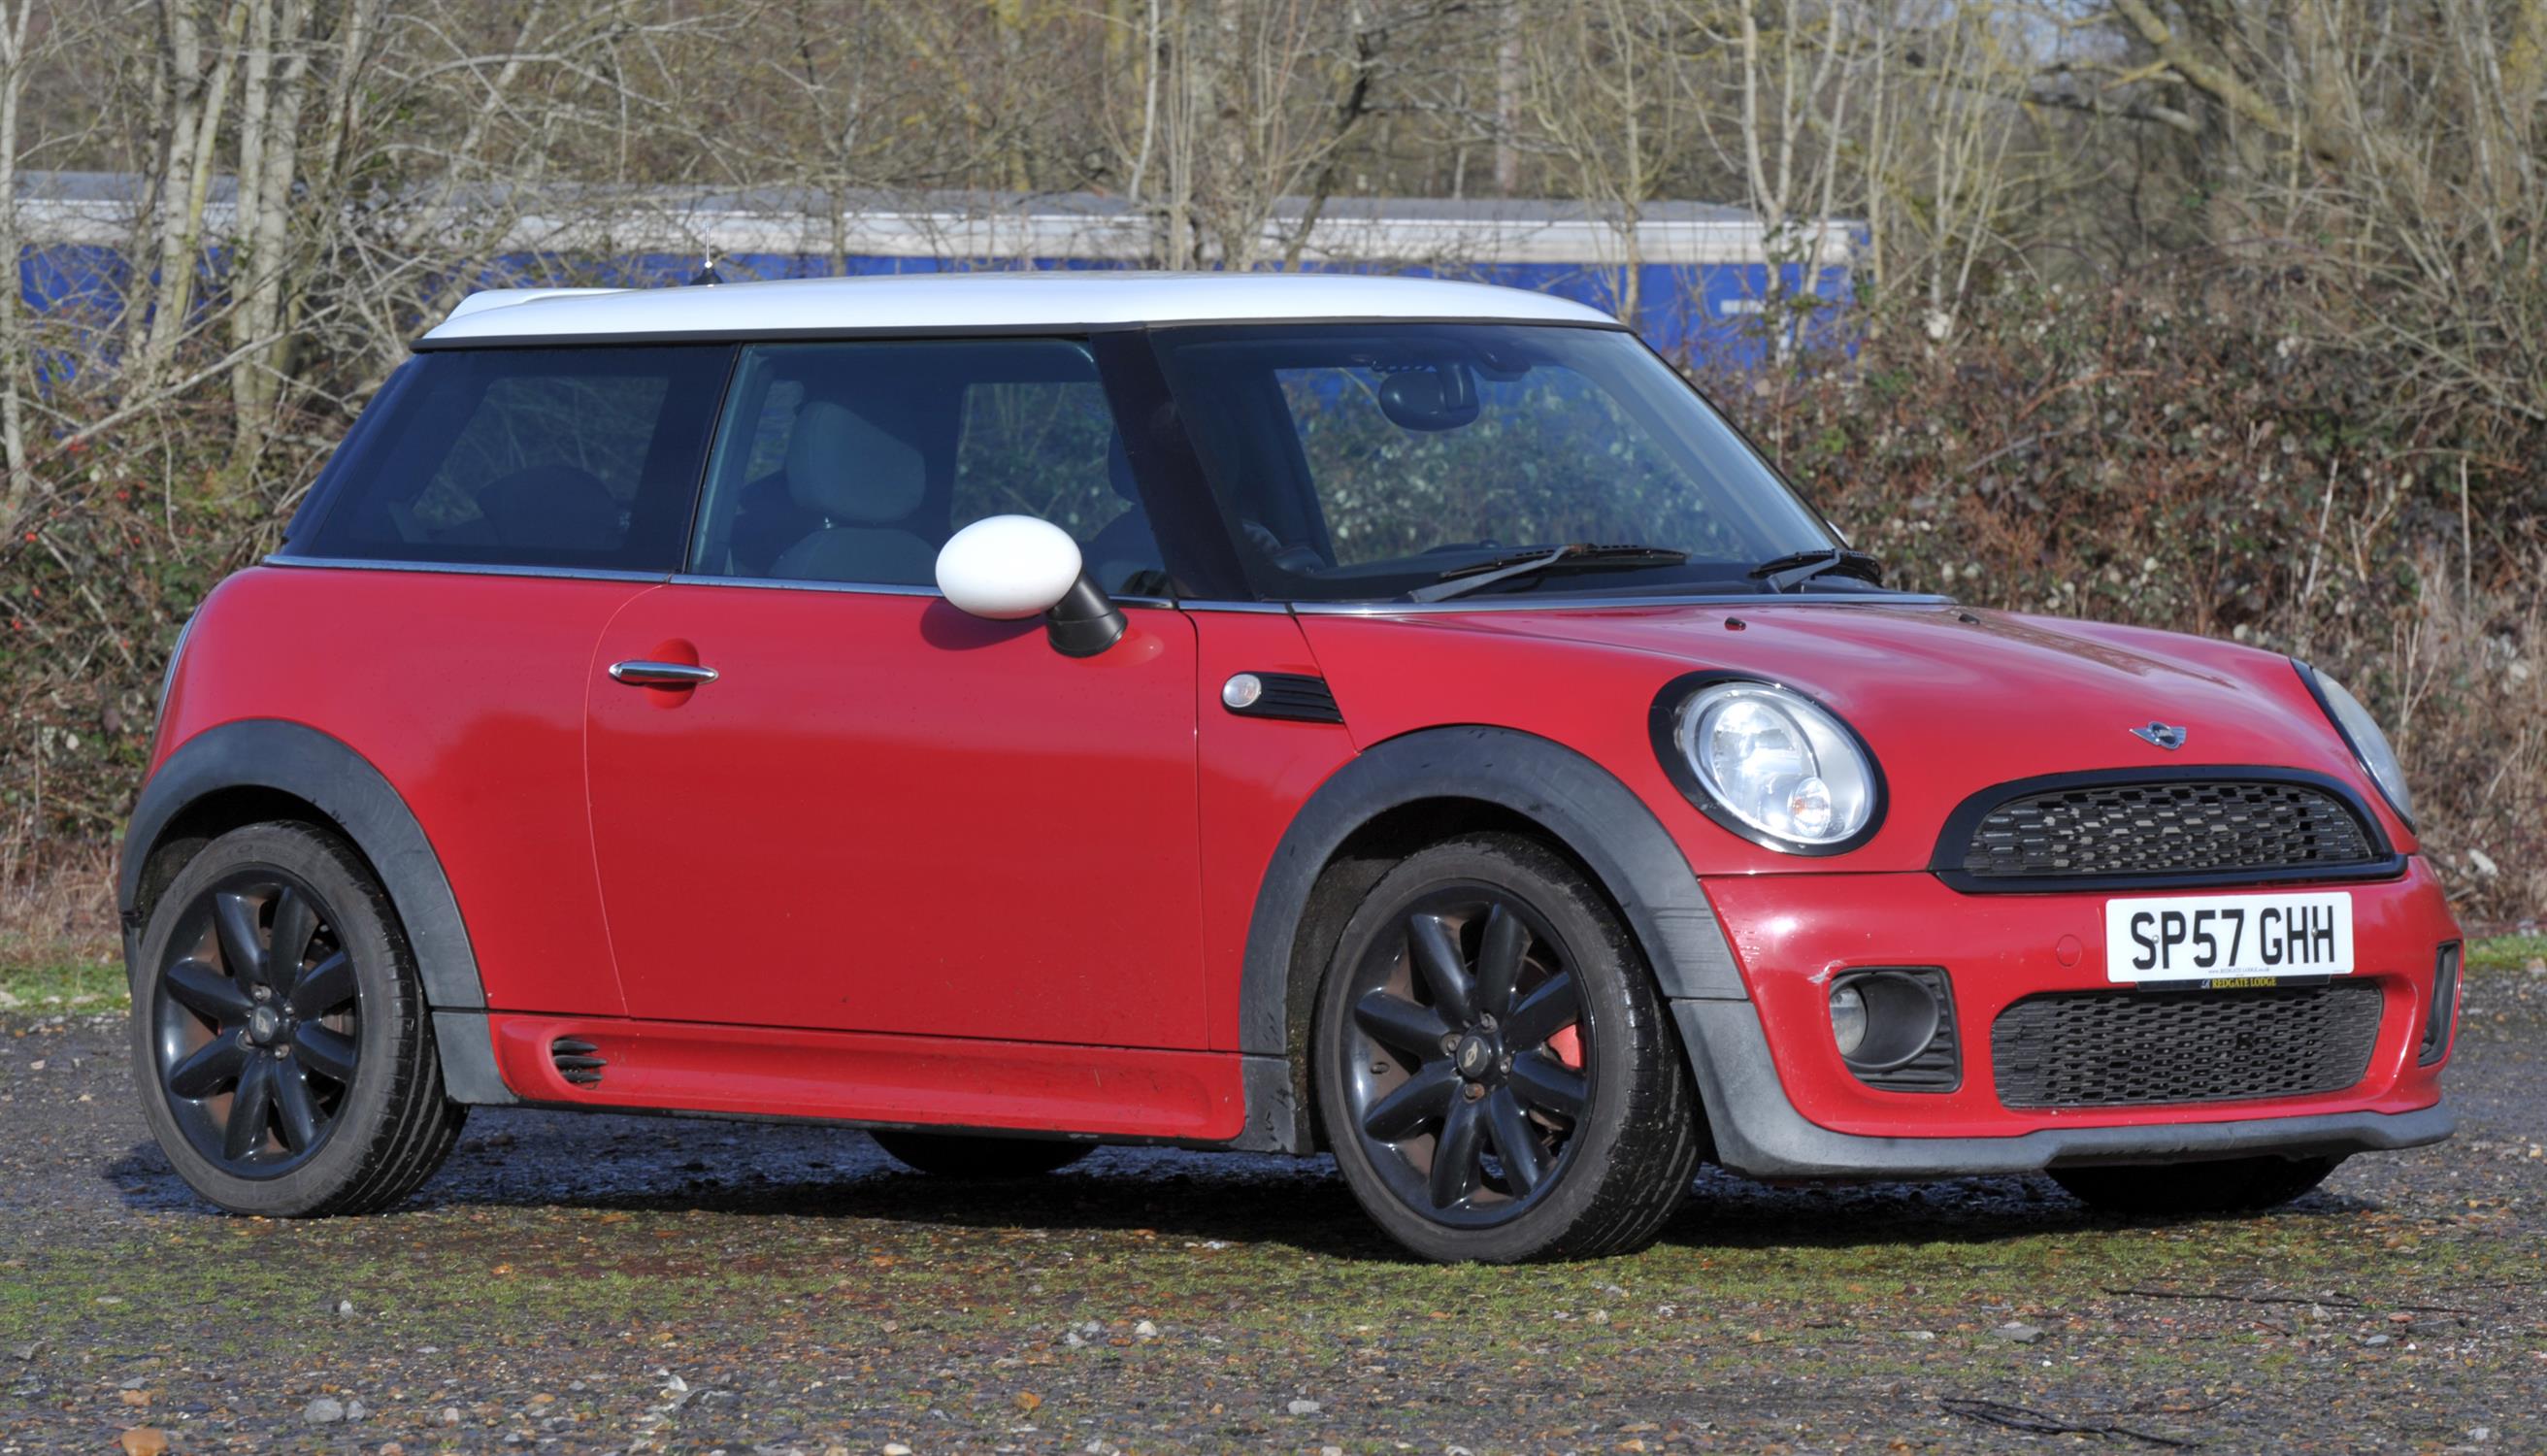 2007 Mini 1.6 Cooper Petrol with John Cooper Works Areo Body Kit. Registration number: SP57 GHH.